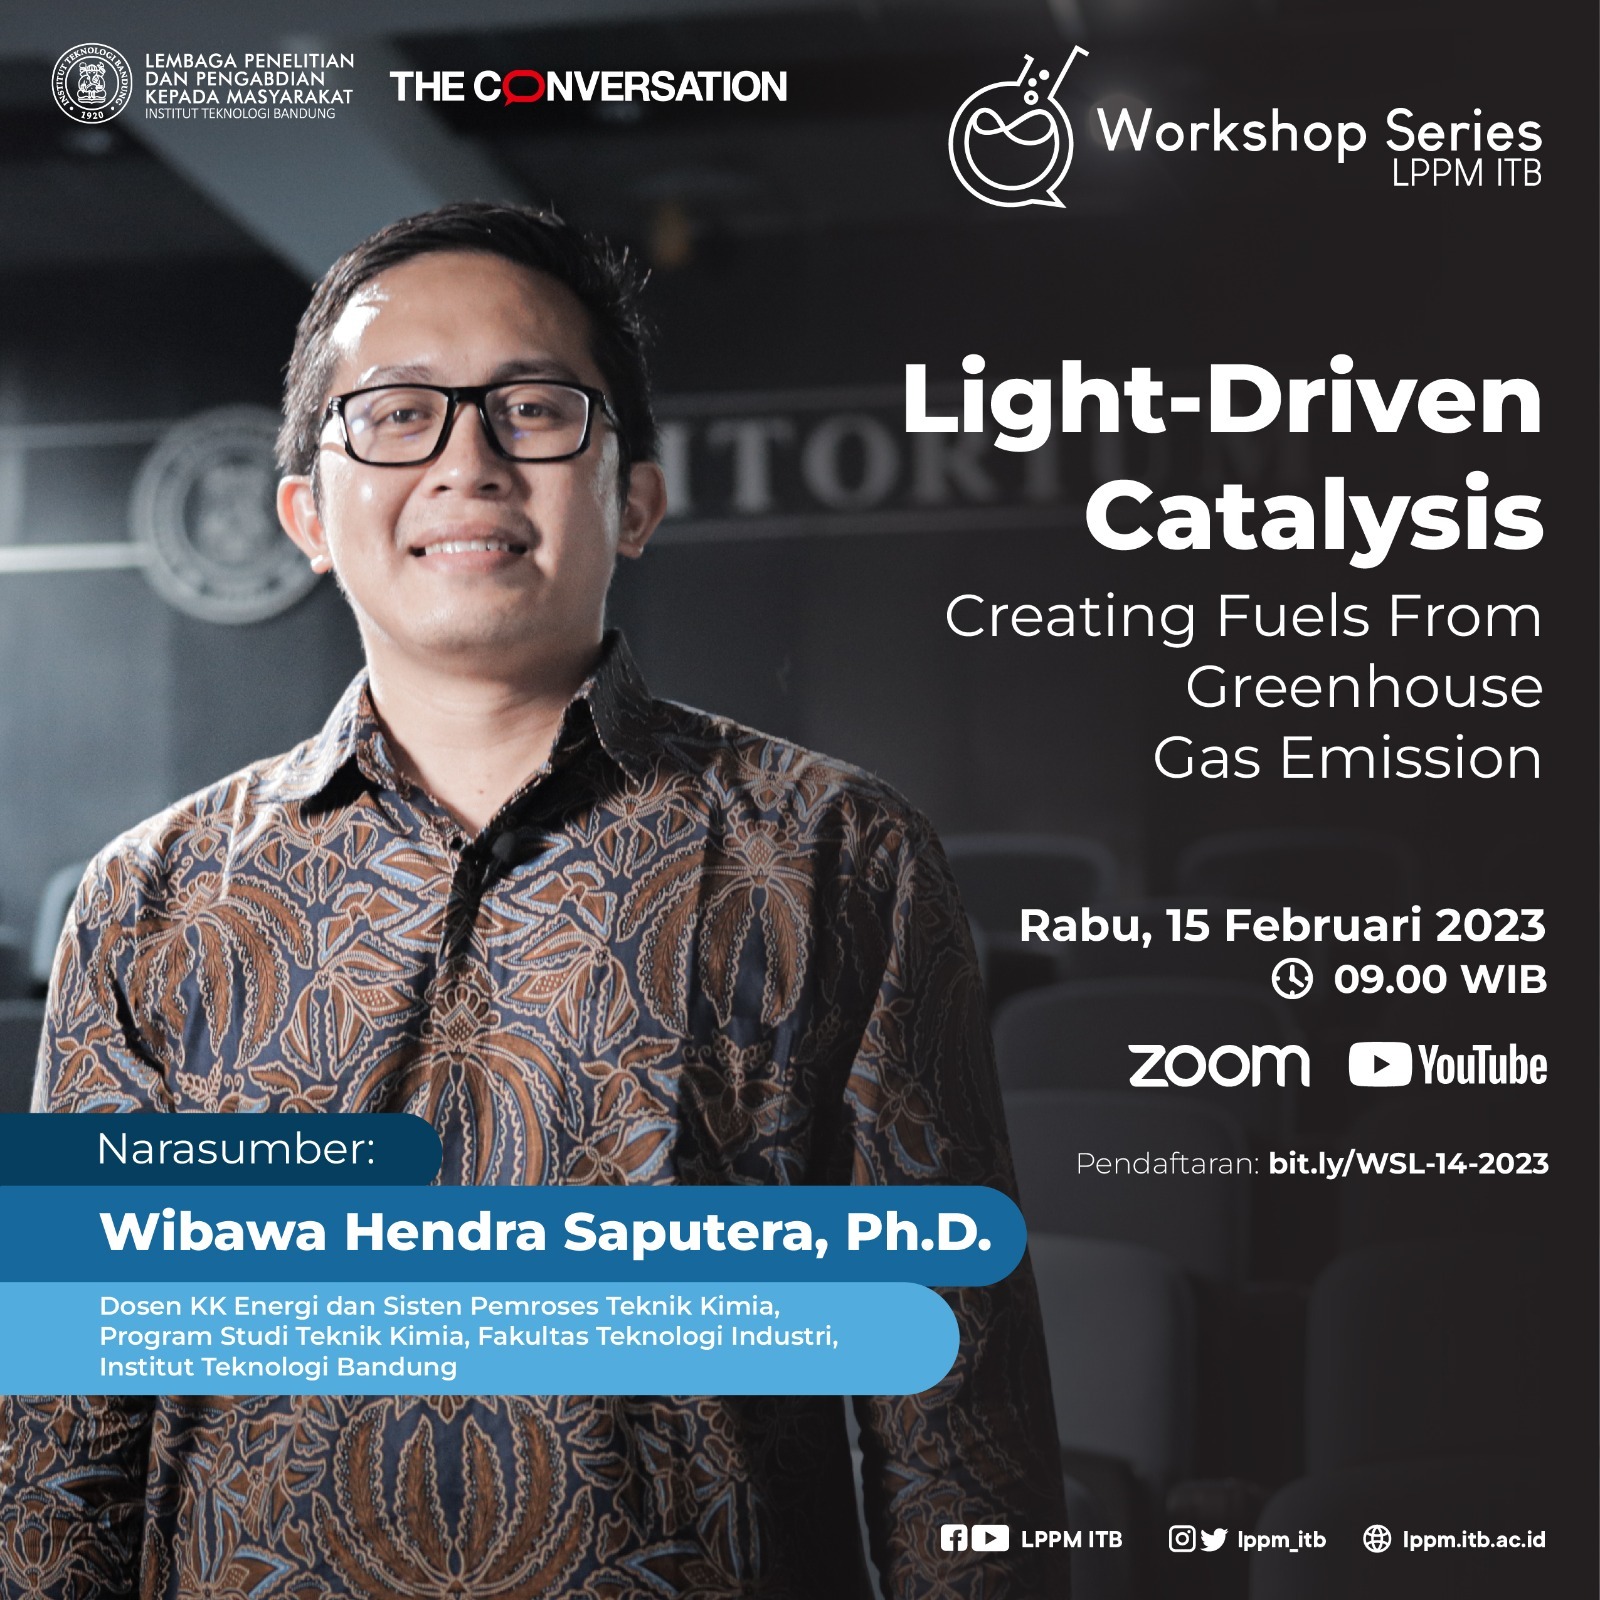 Workshop Series Light-Driven Catalysis Creating Fuels from Greenhouse Gas Emission